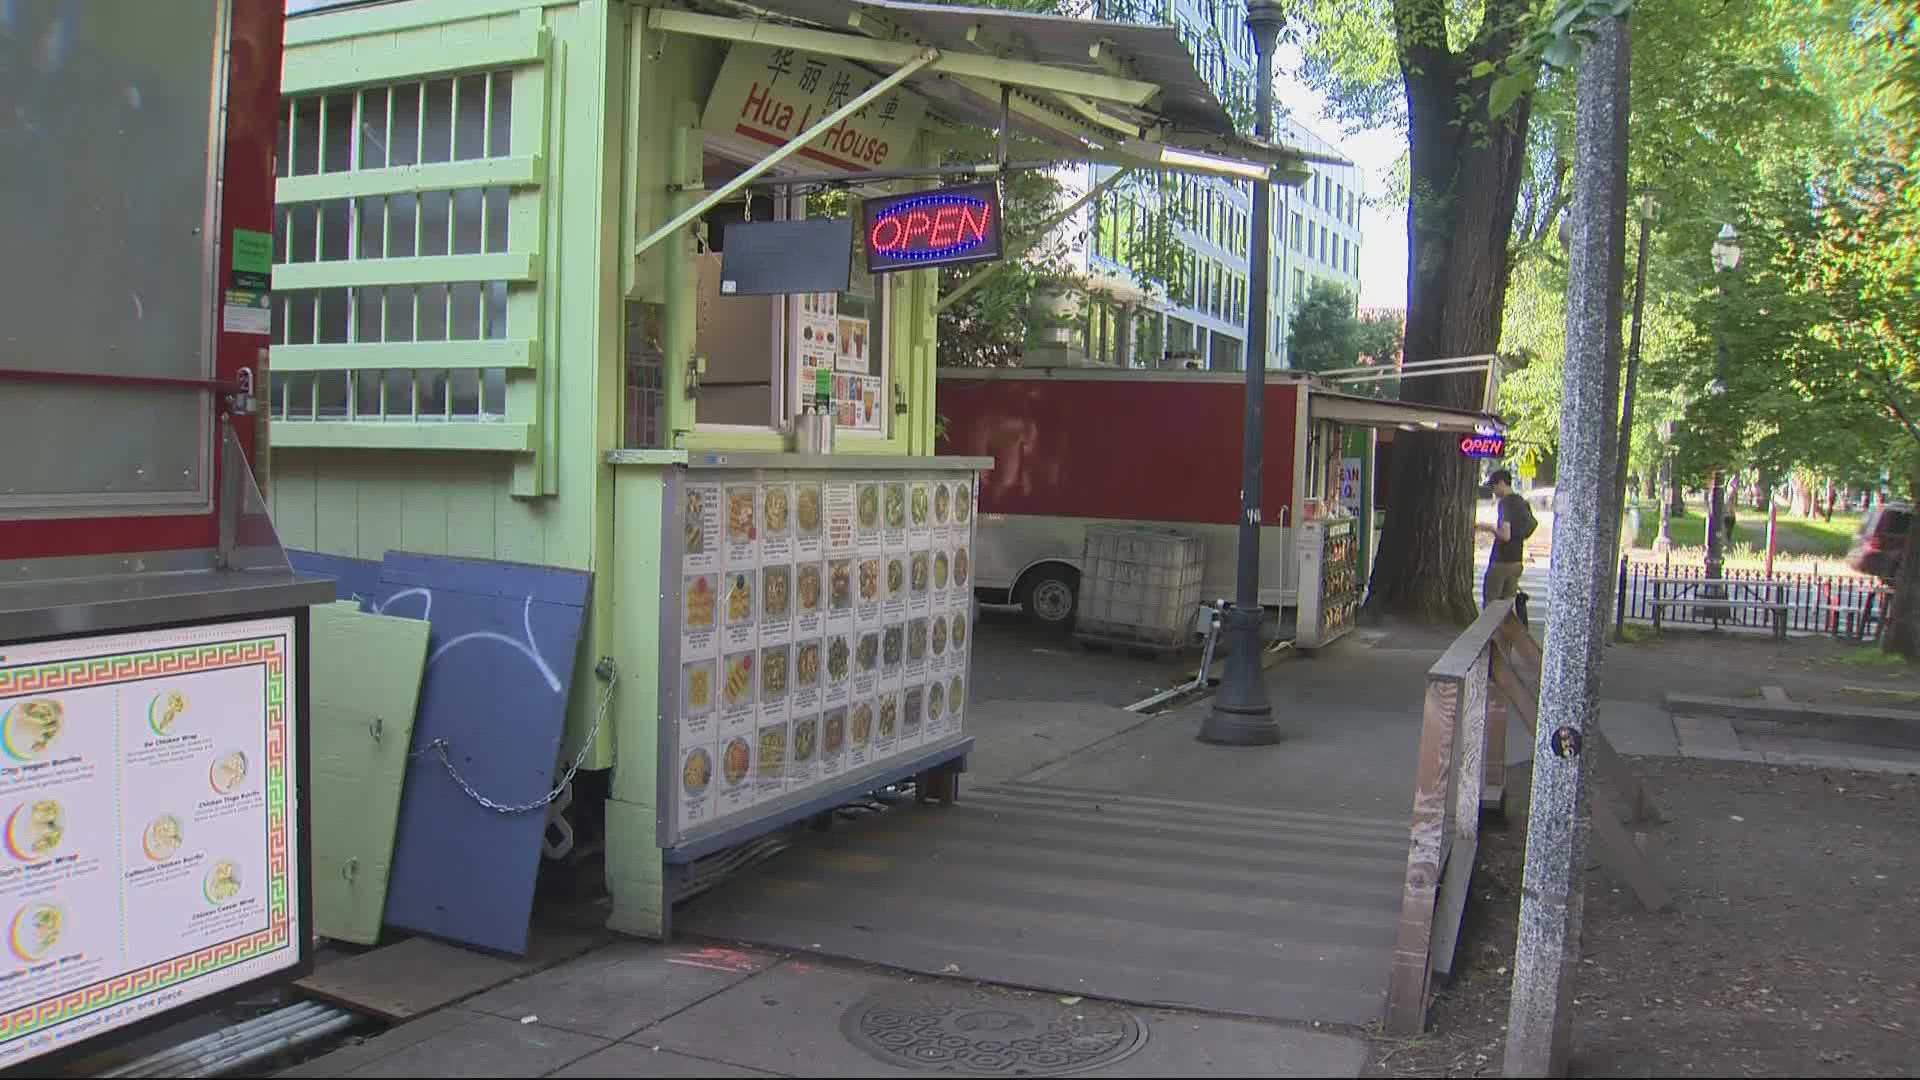 The Ankeny West food cart pod opened on West Burnside nearly a year ago, but owners have struggled amid bad weather, crime and lasting impacts of the pandemic.